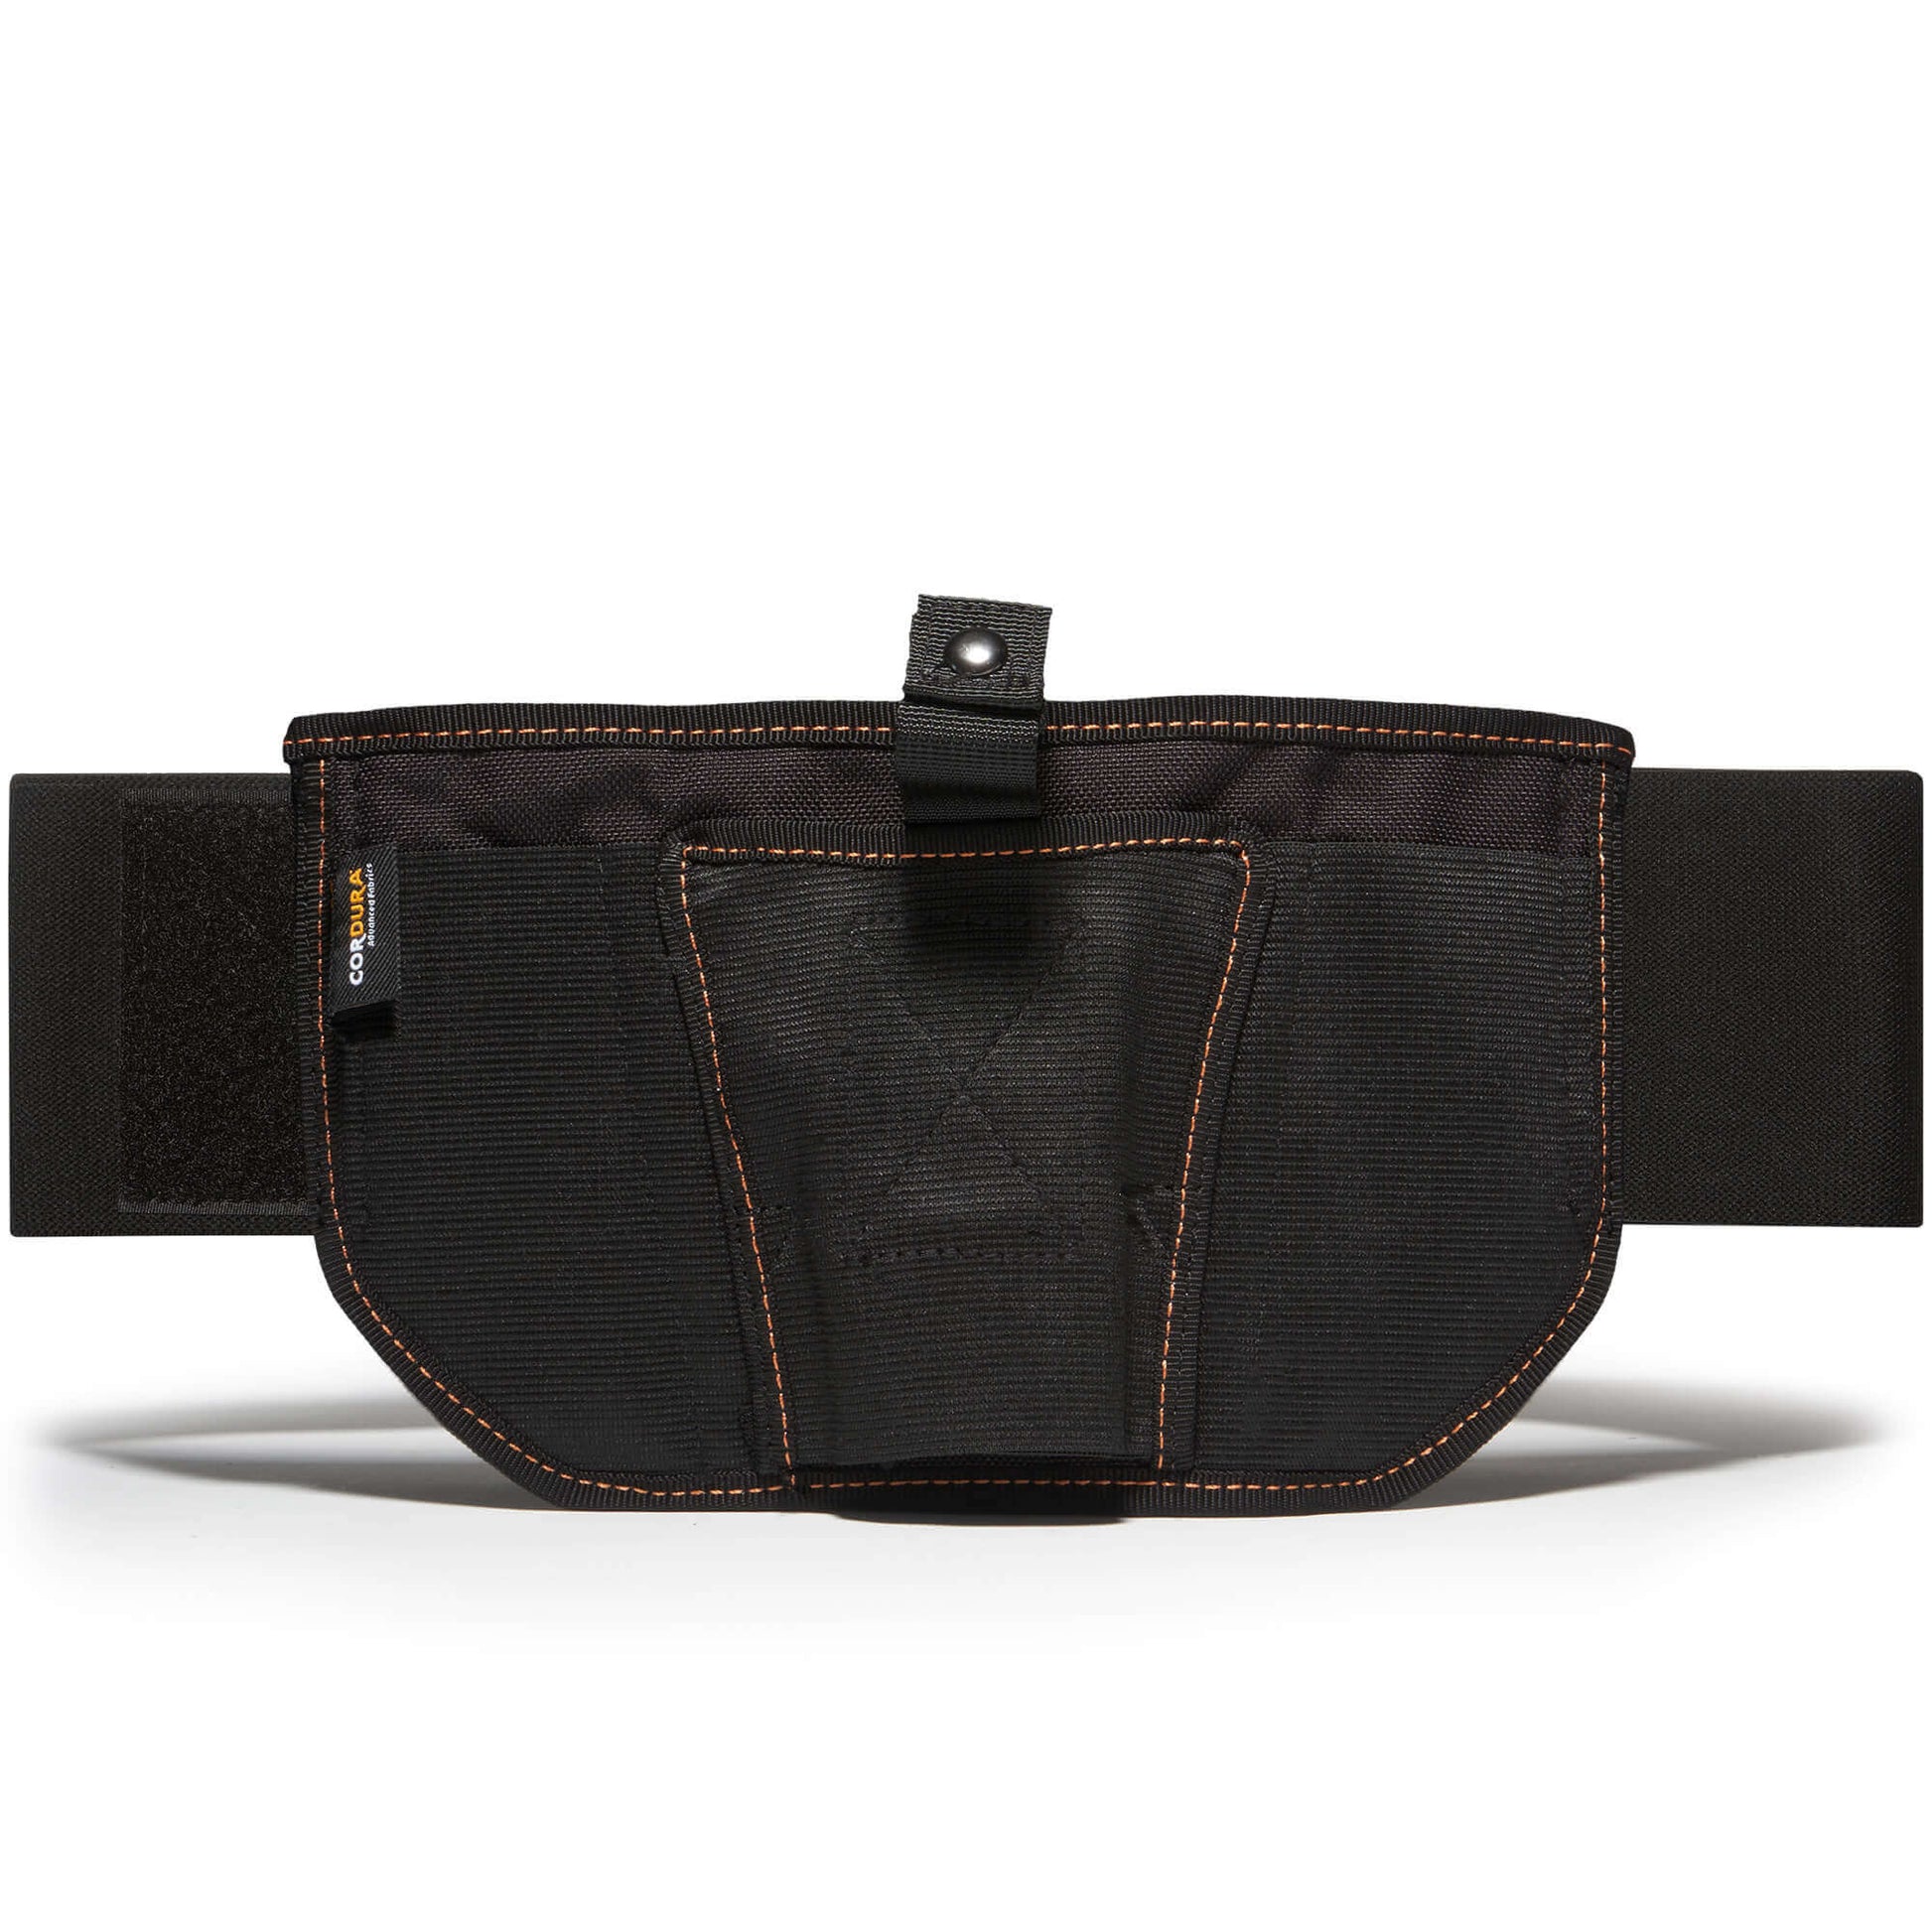 Buy Gun Pak Belt Pouch And More